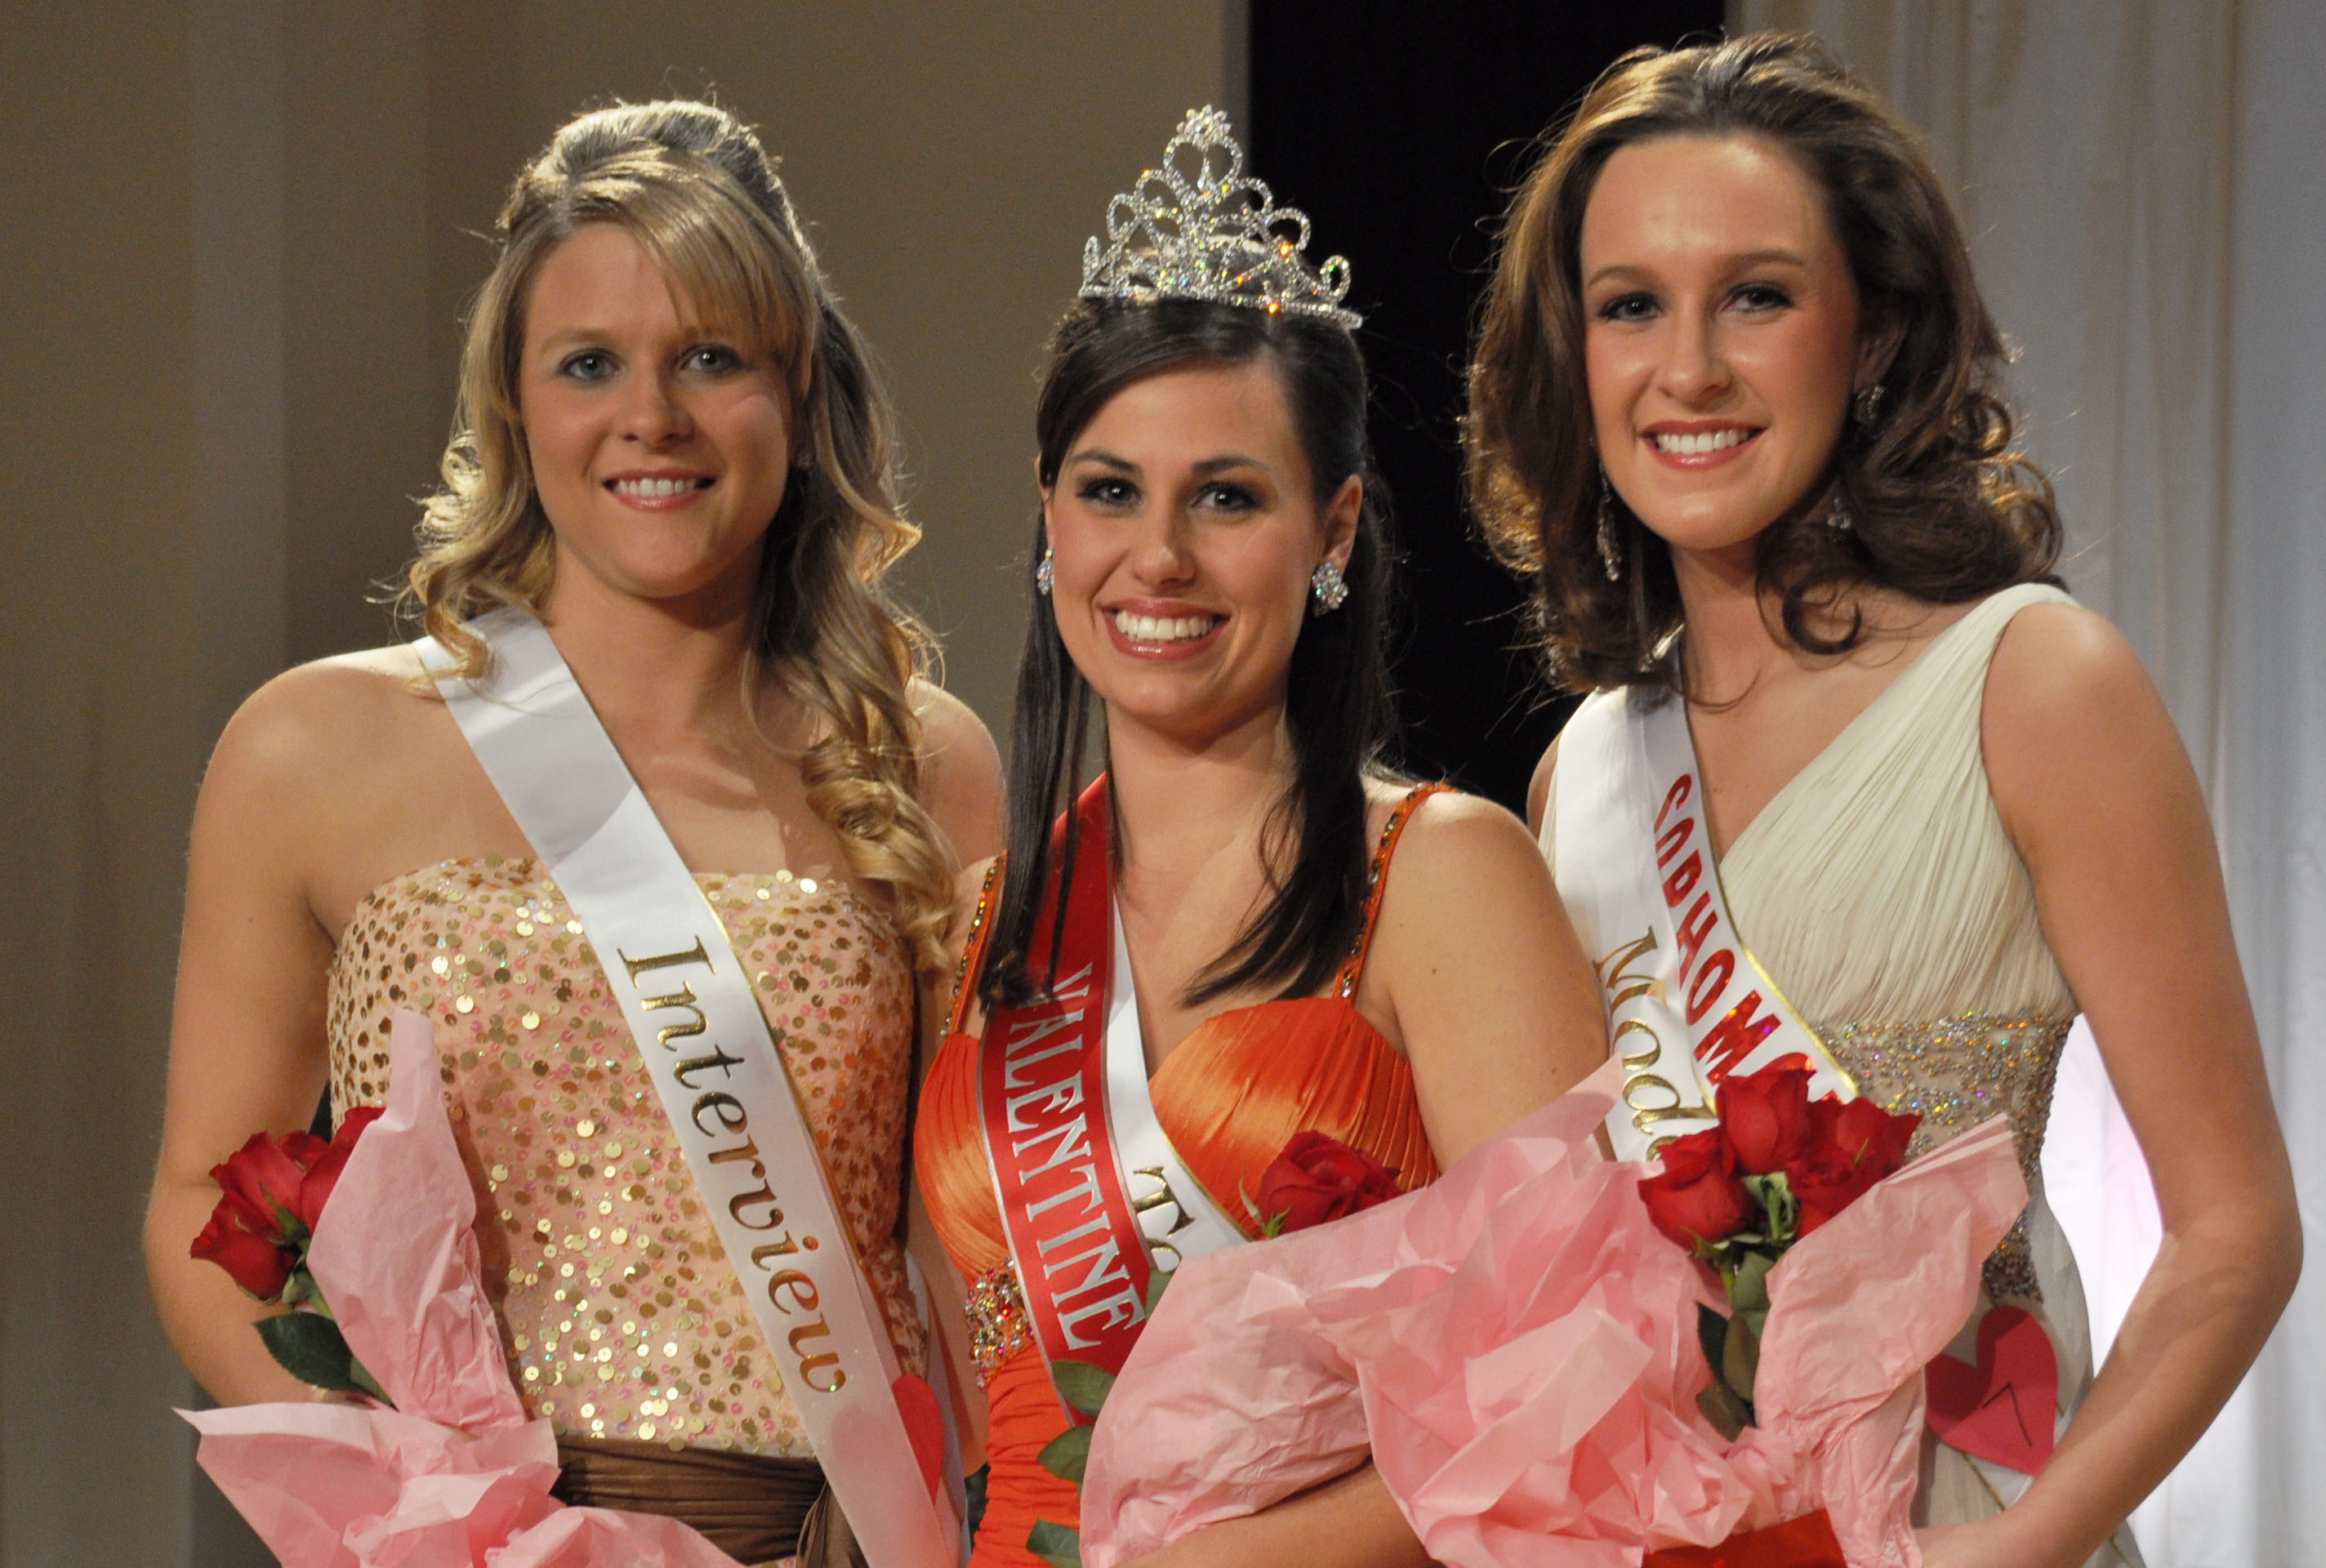 Winners in the Campbellsville University Valentine Pageant Feb. 12 were from left: Megan Massey, Science Hill, Ky., second runner up, representing University Chorale; Leah Hayes, Greensburg, Ky., queen, representing SWITCH; and Jesslyn Long, Stanford, Ky., first runner up, representing sophomore class. (Campbellsville University Photo by Munkh-Amgalan Galsanjamts